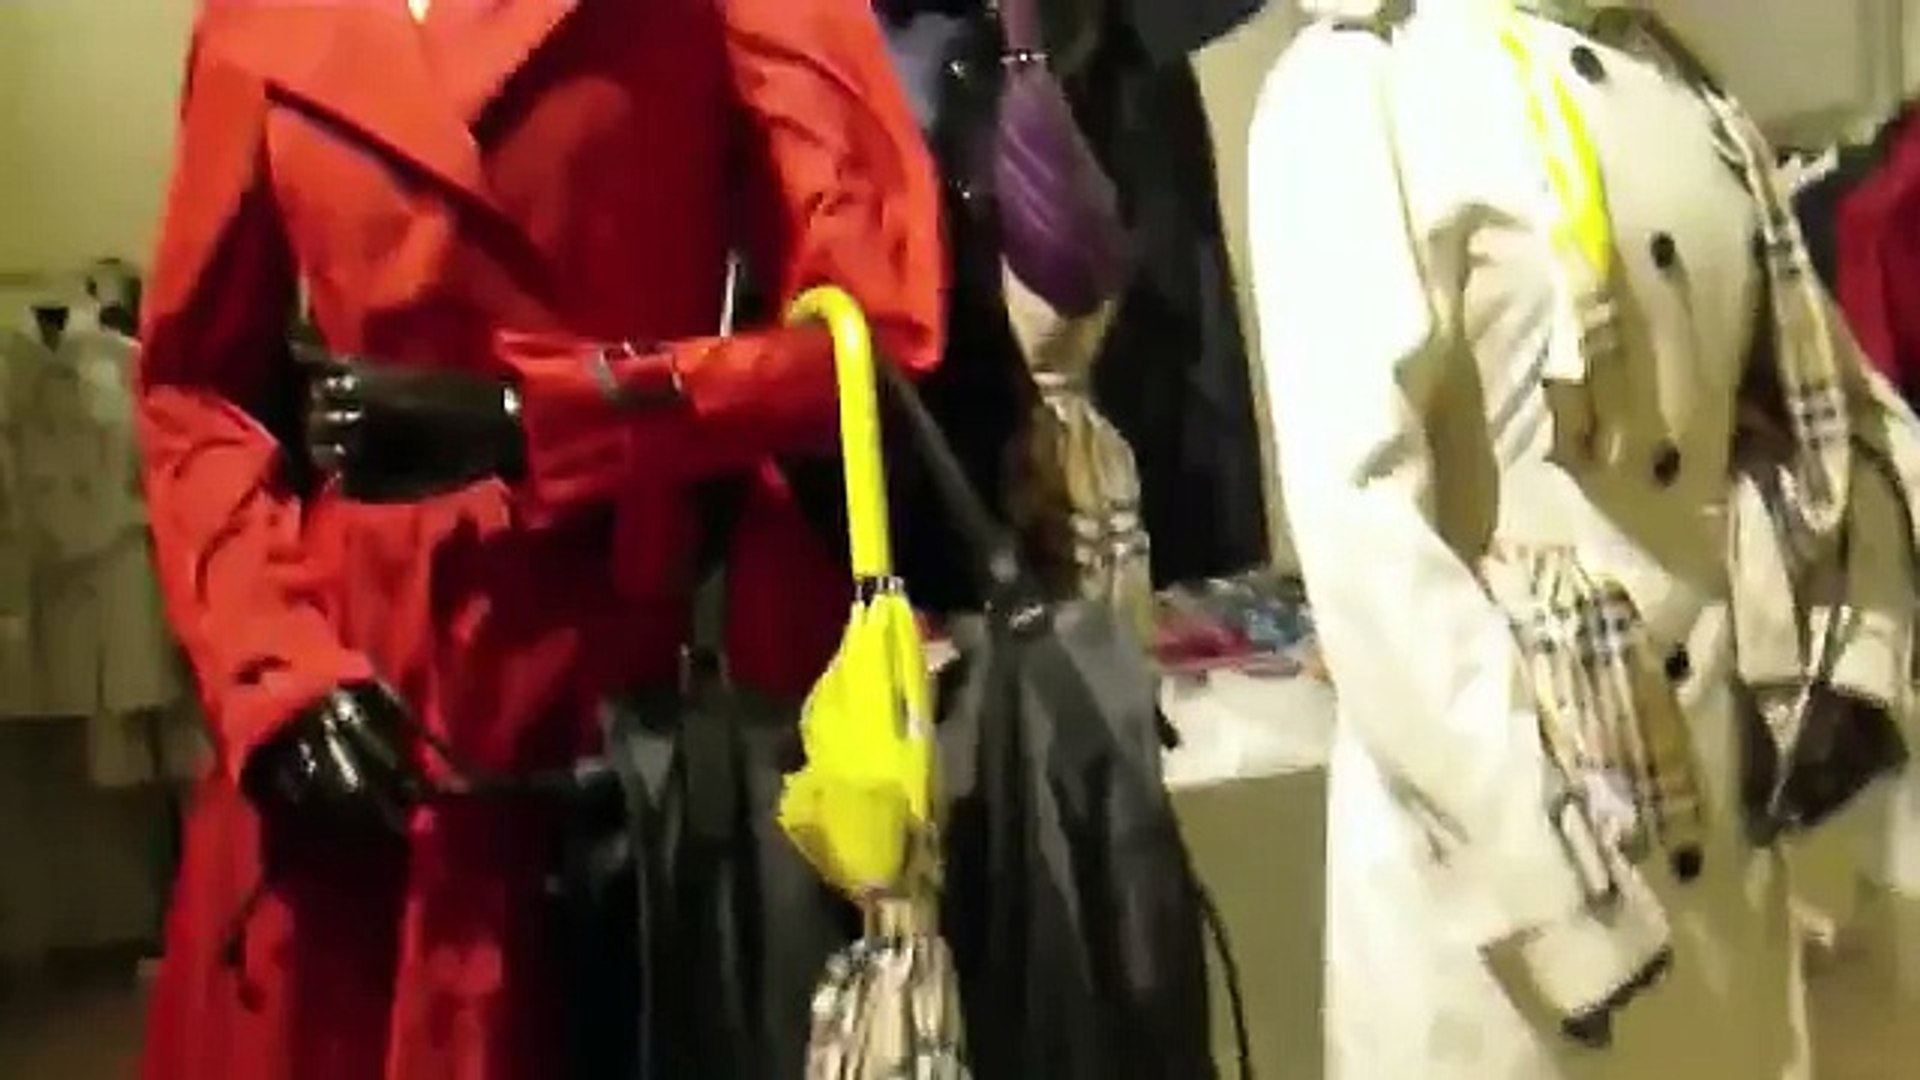 ⁣SHOPPING AT BURBERRY 4 BAGS, CLOTHES (Spycam)